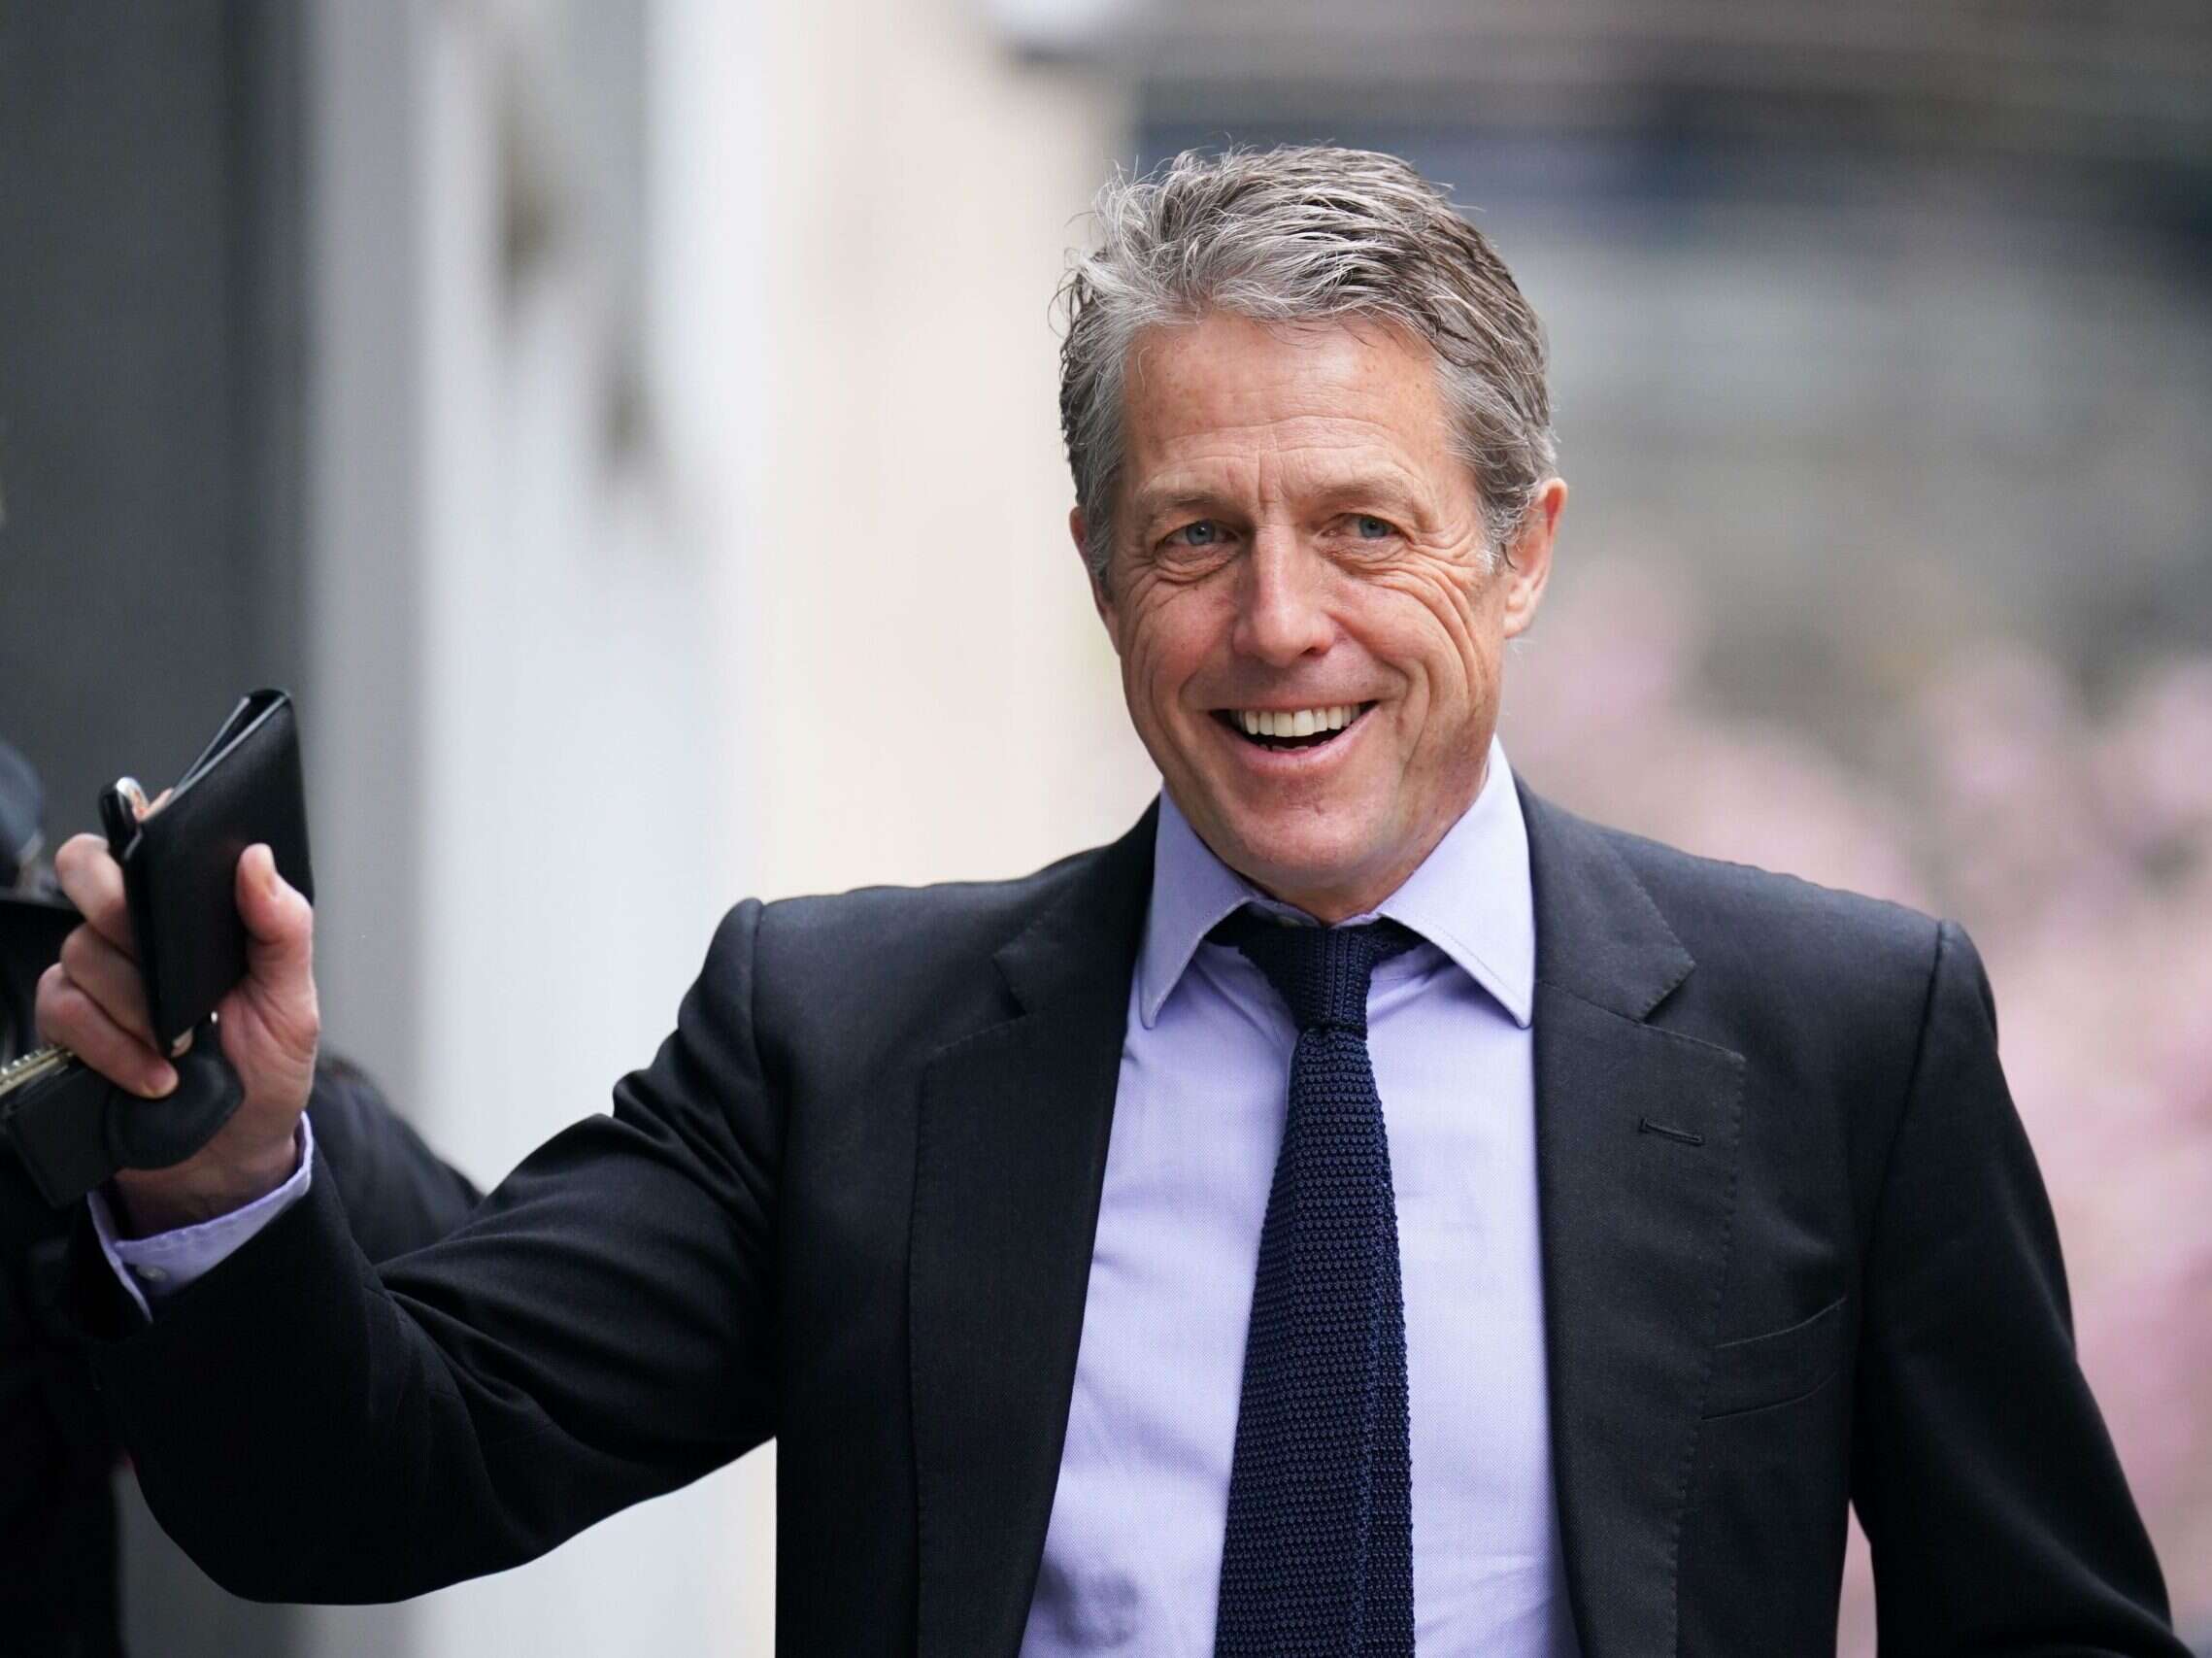 Hugh Grant settles claim against Sun publisher due to risk of £10m legal costs